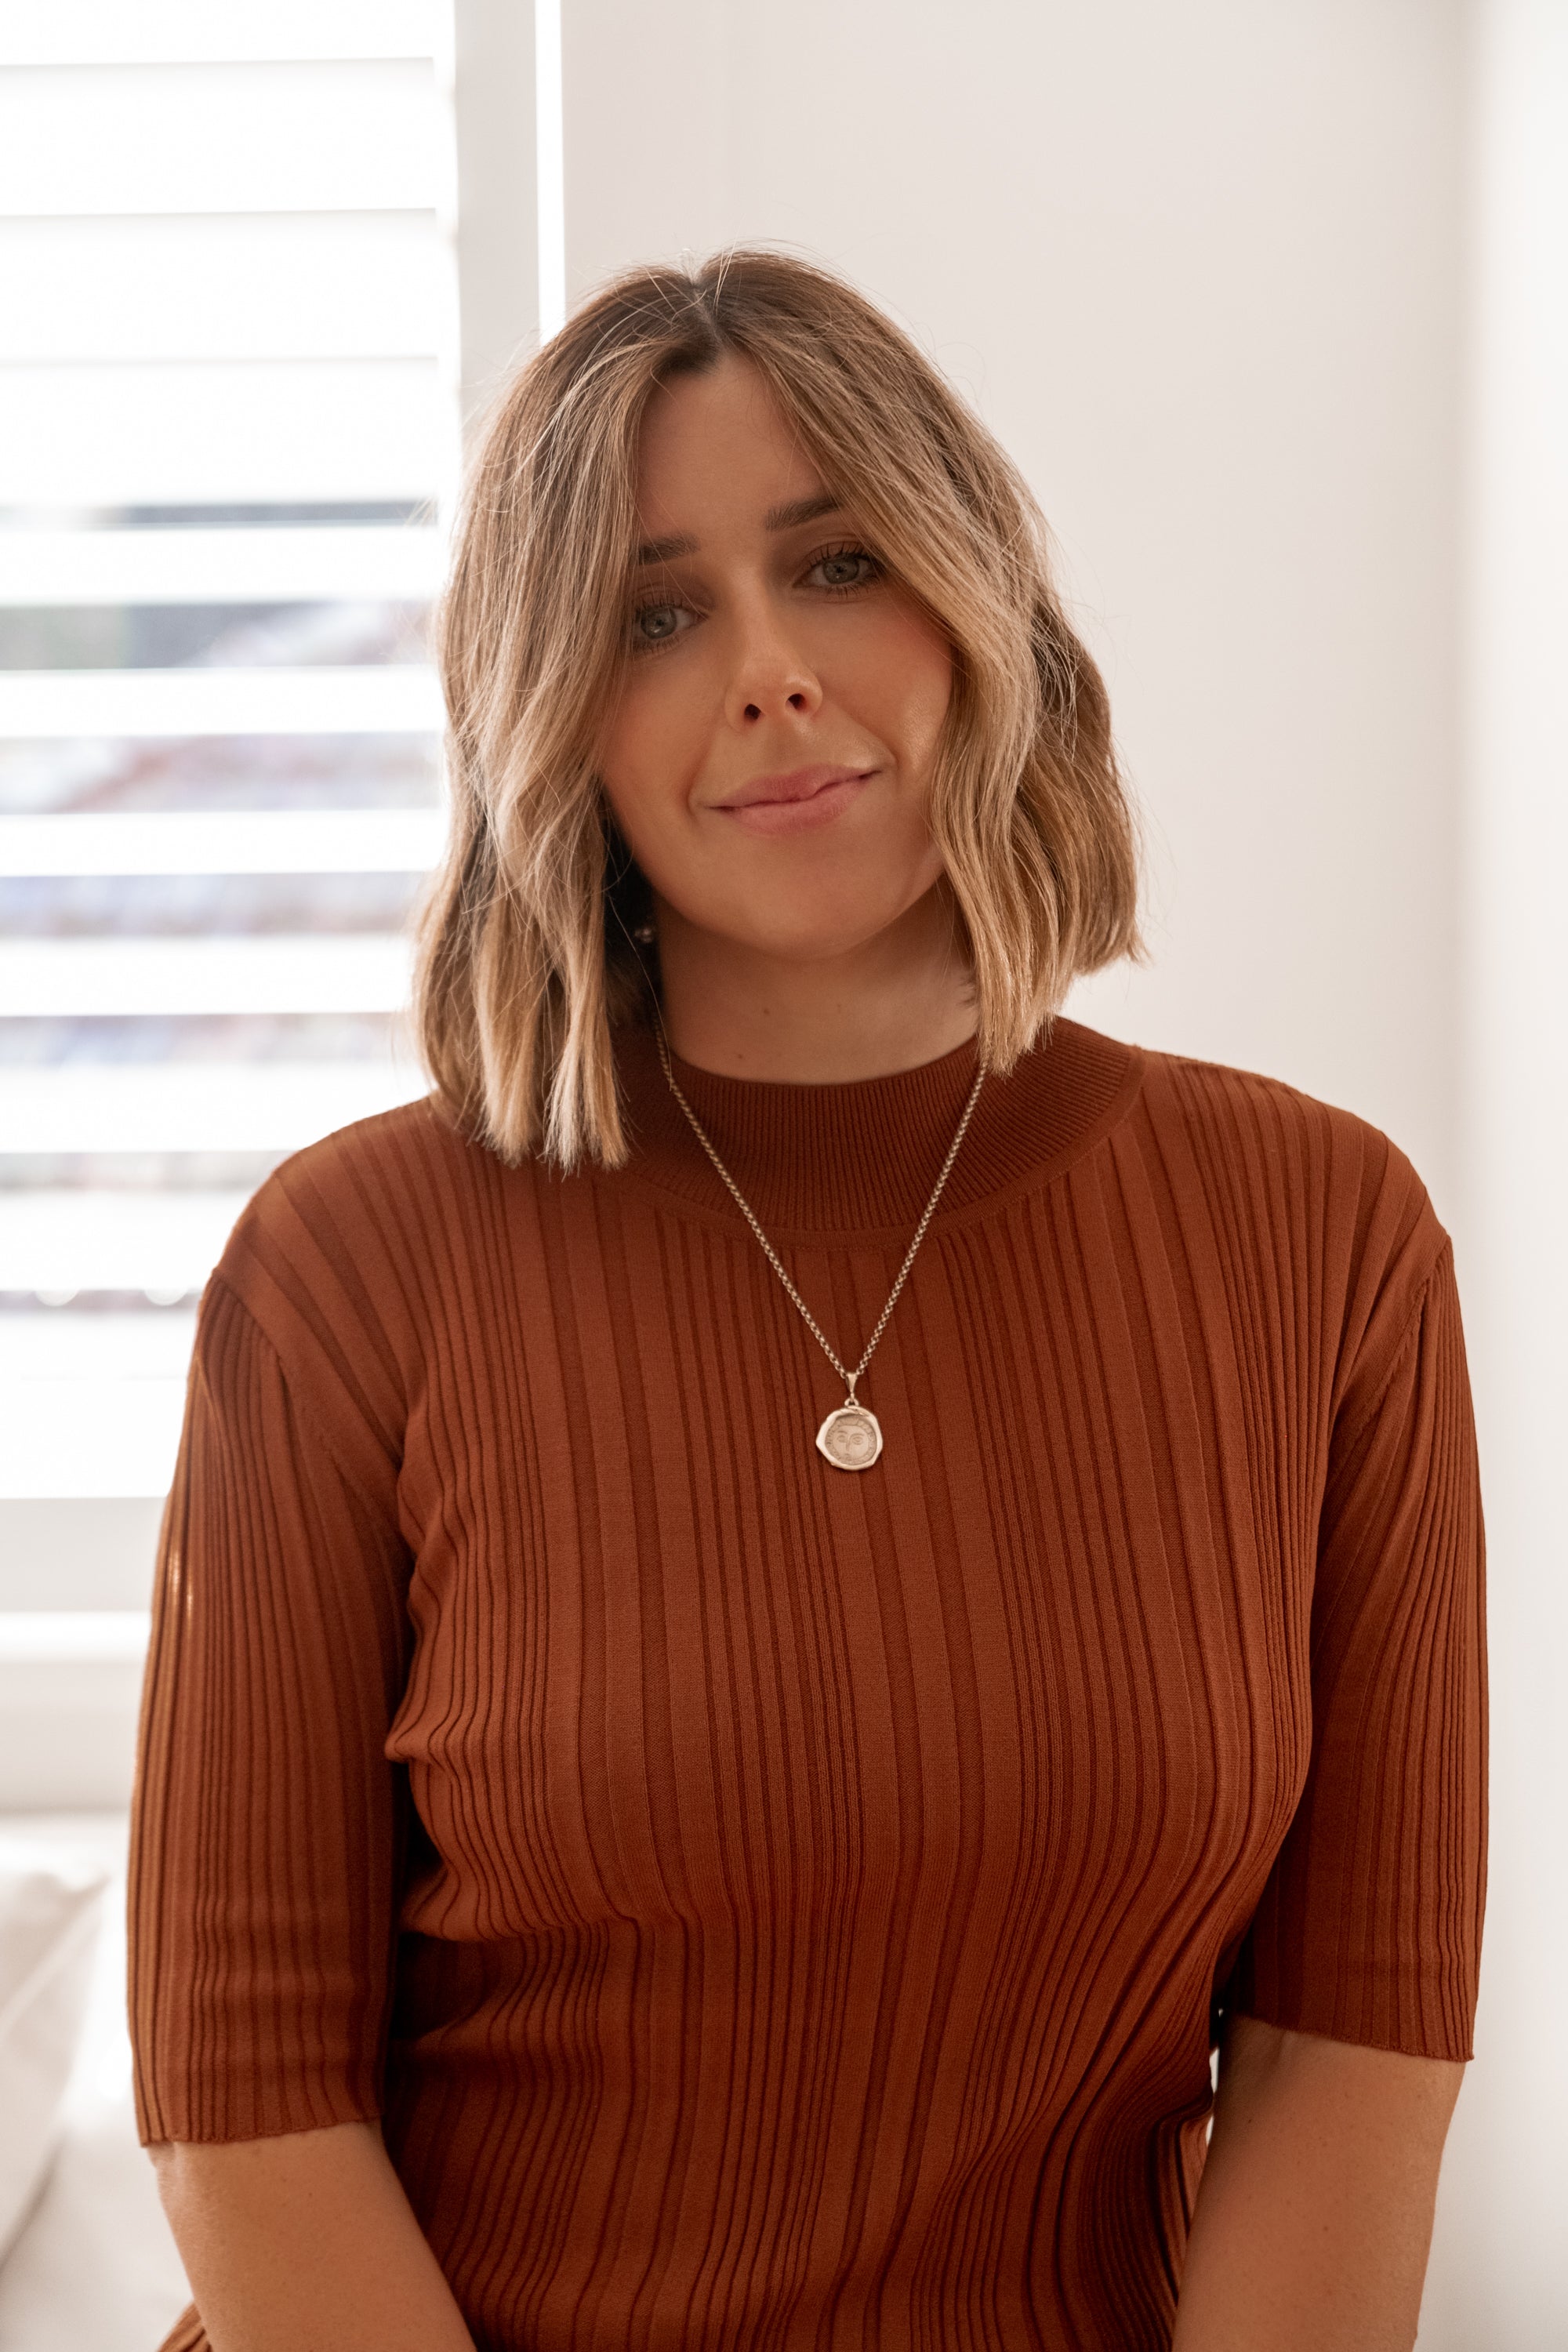 Bec & Bridge - Toulouse Ribbed Knit Top, Brown - Worn For Good